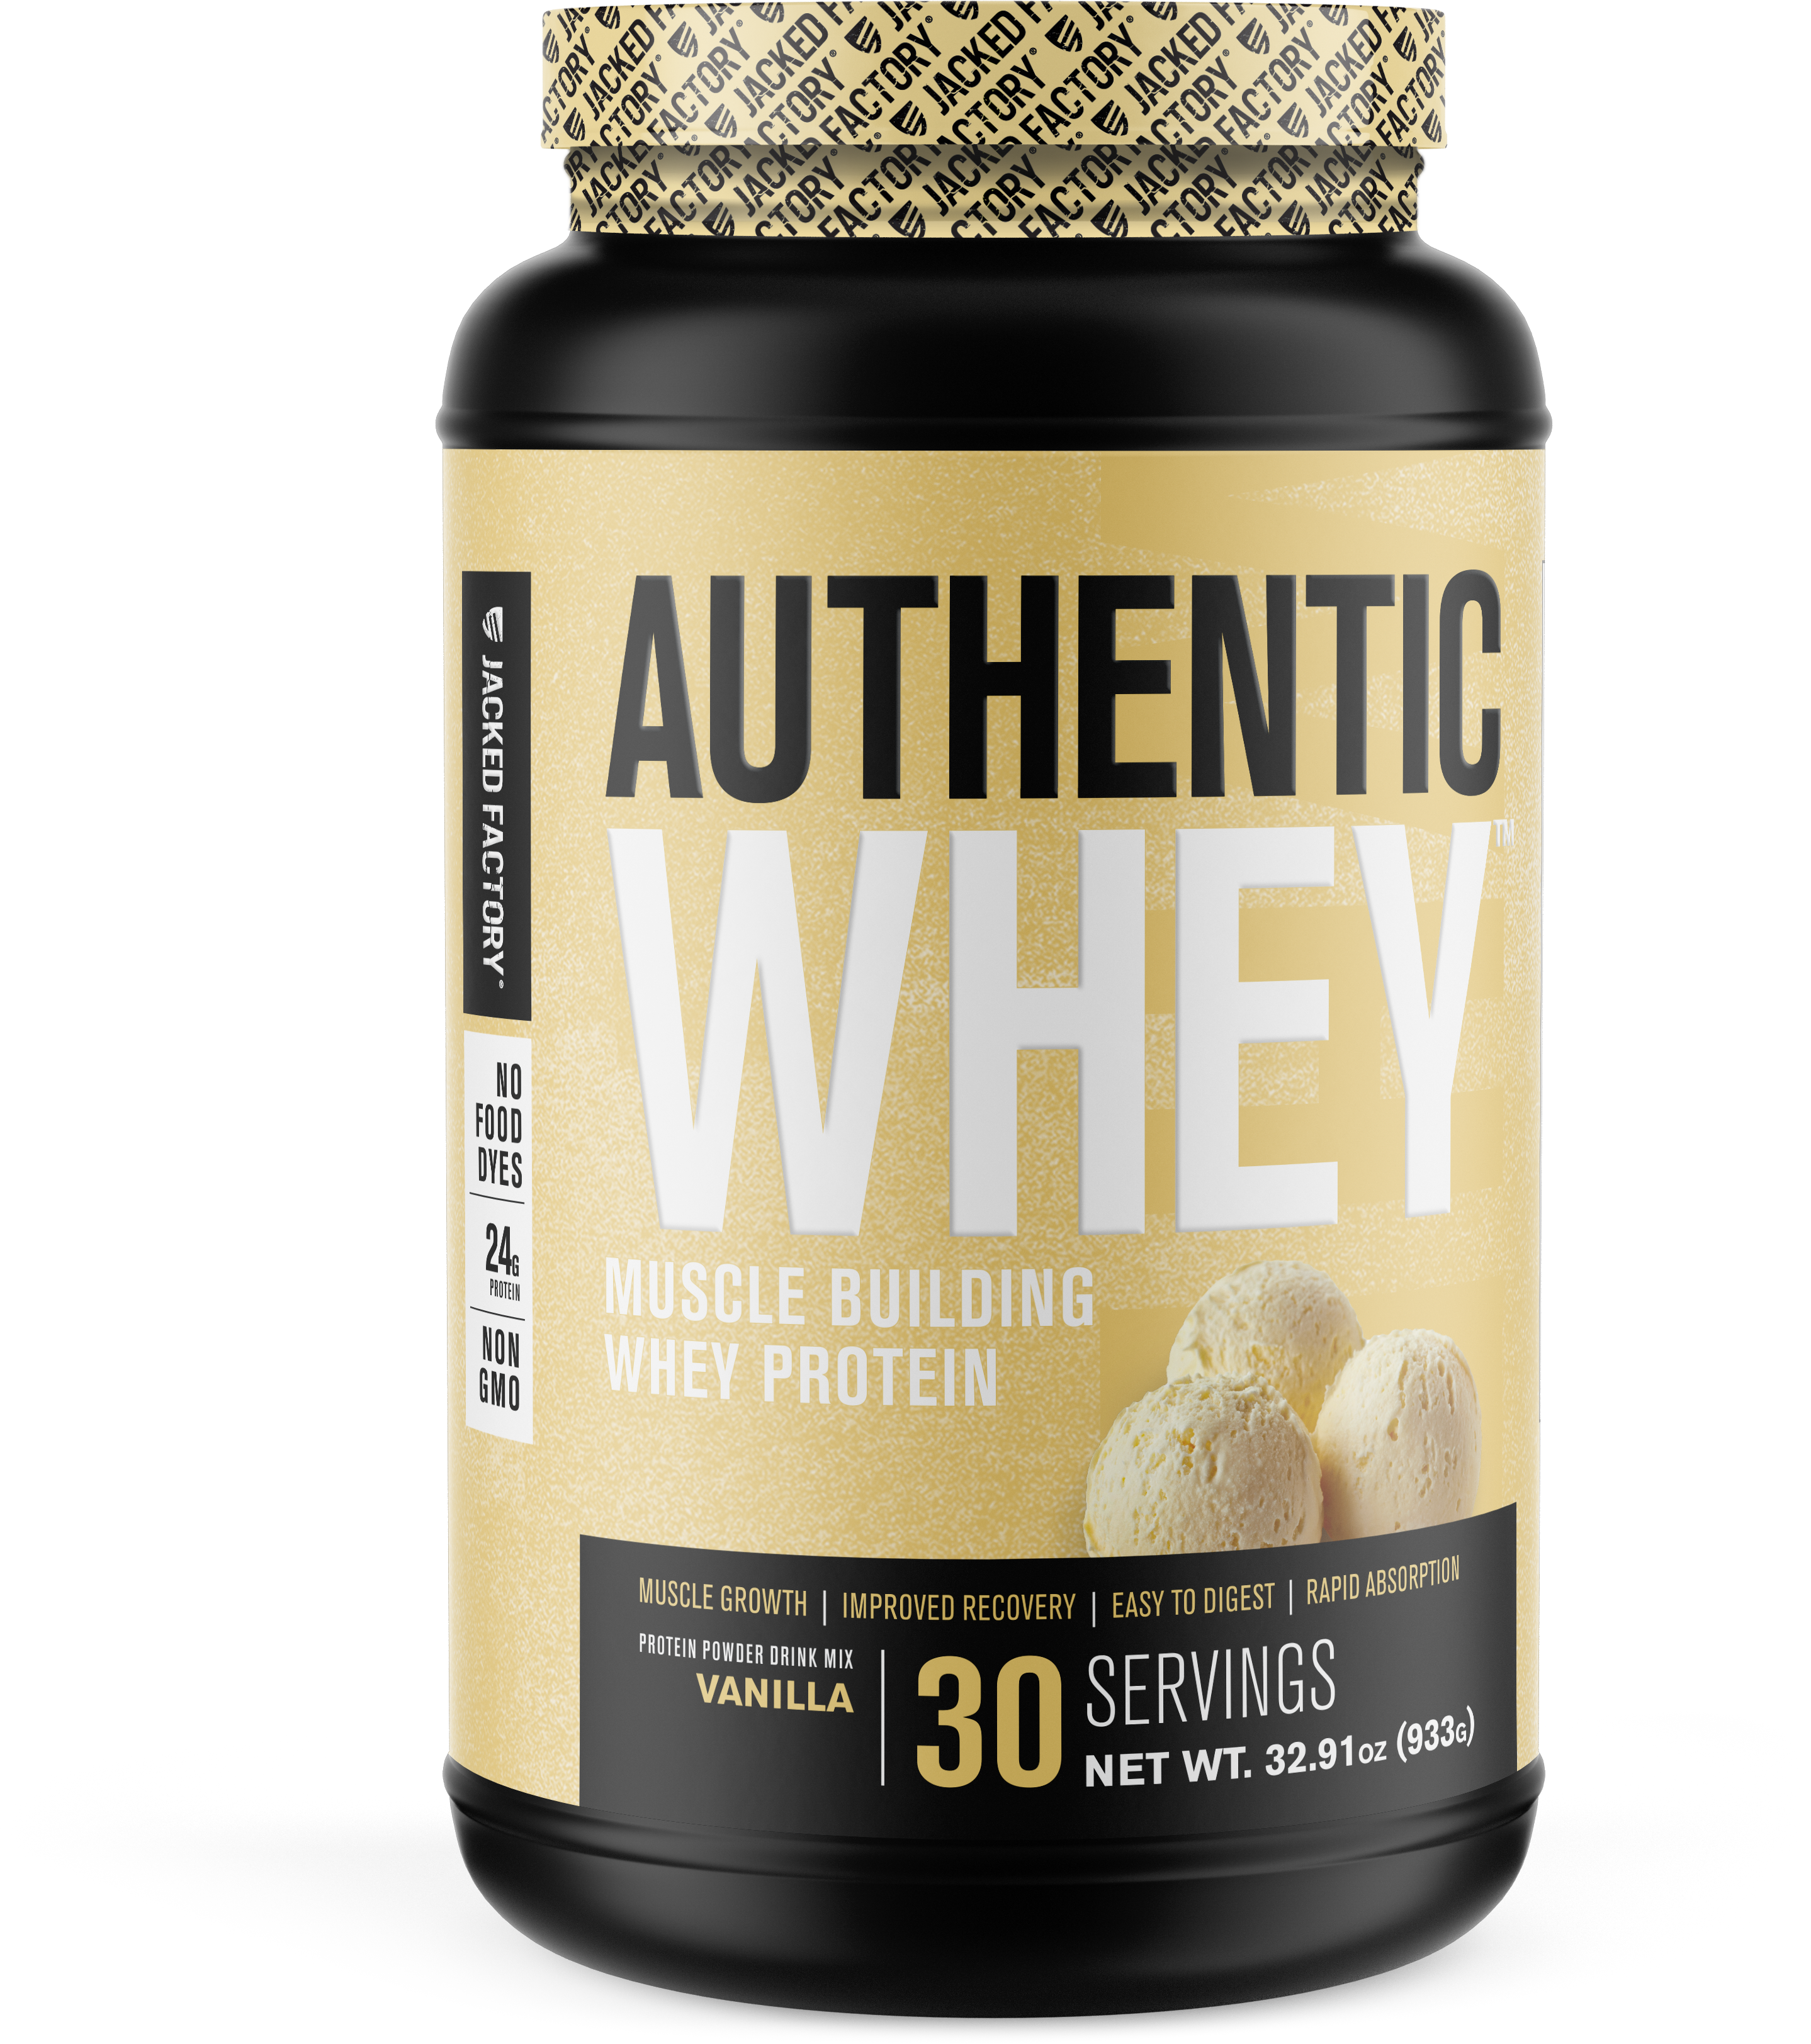 Voorkeur Correspondent twintig Authentic Whey Muscle Building Protein Powder | Jacked Factory